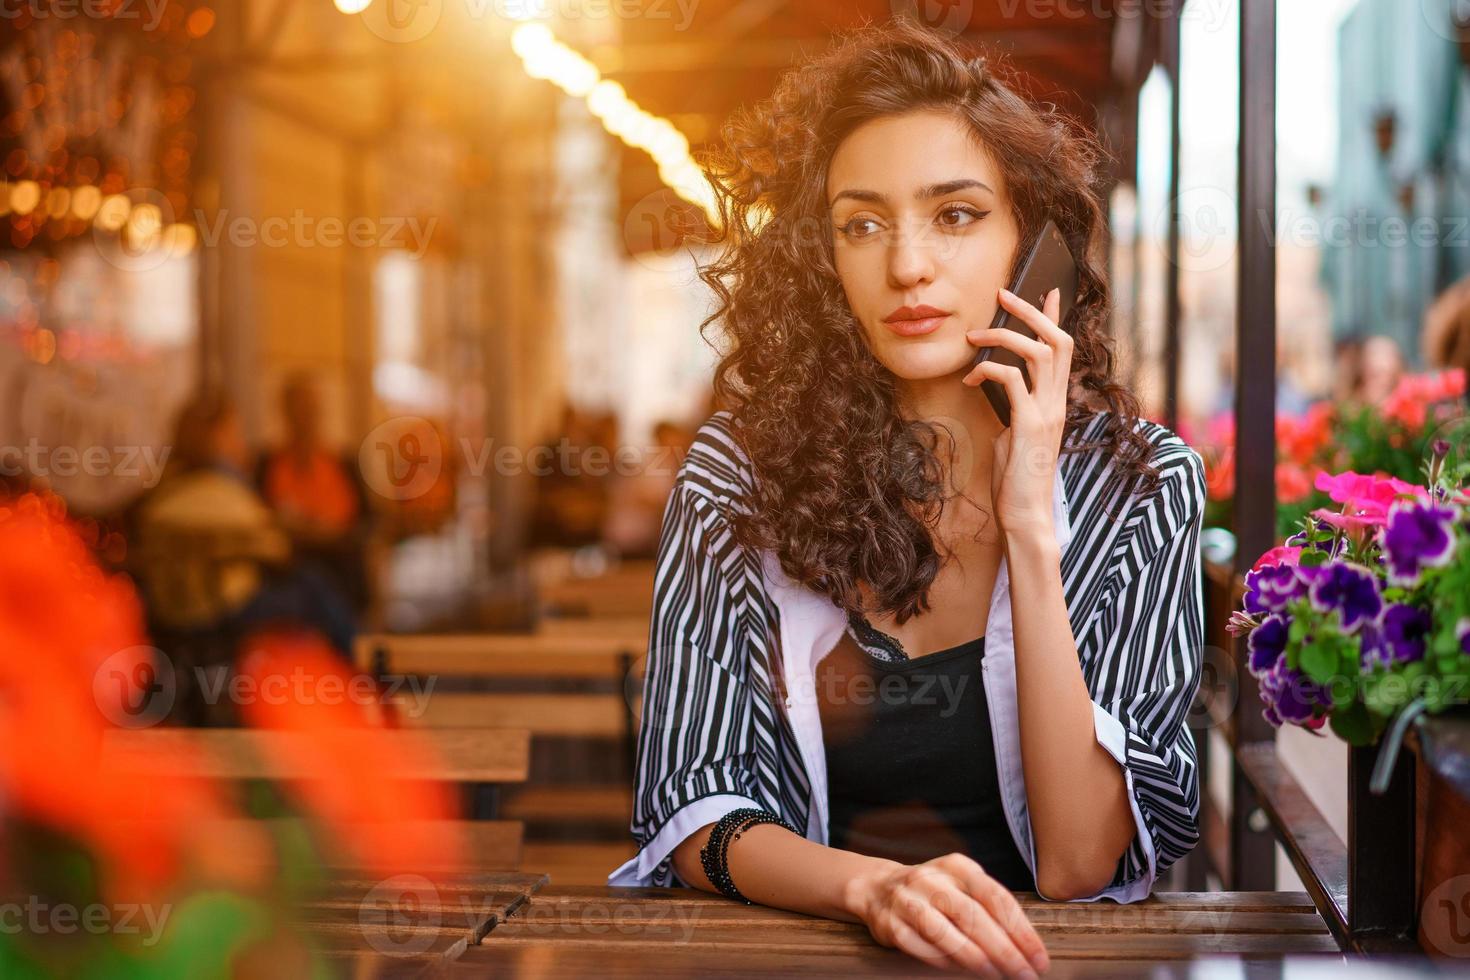 Portrait of a young woman in a cafe on the street sitting at a table and talking on the phone. Lifestyle beauty woman concept. photo